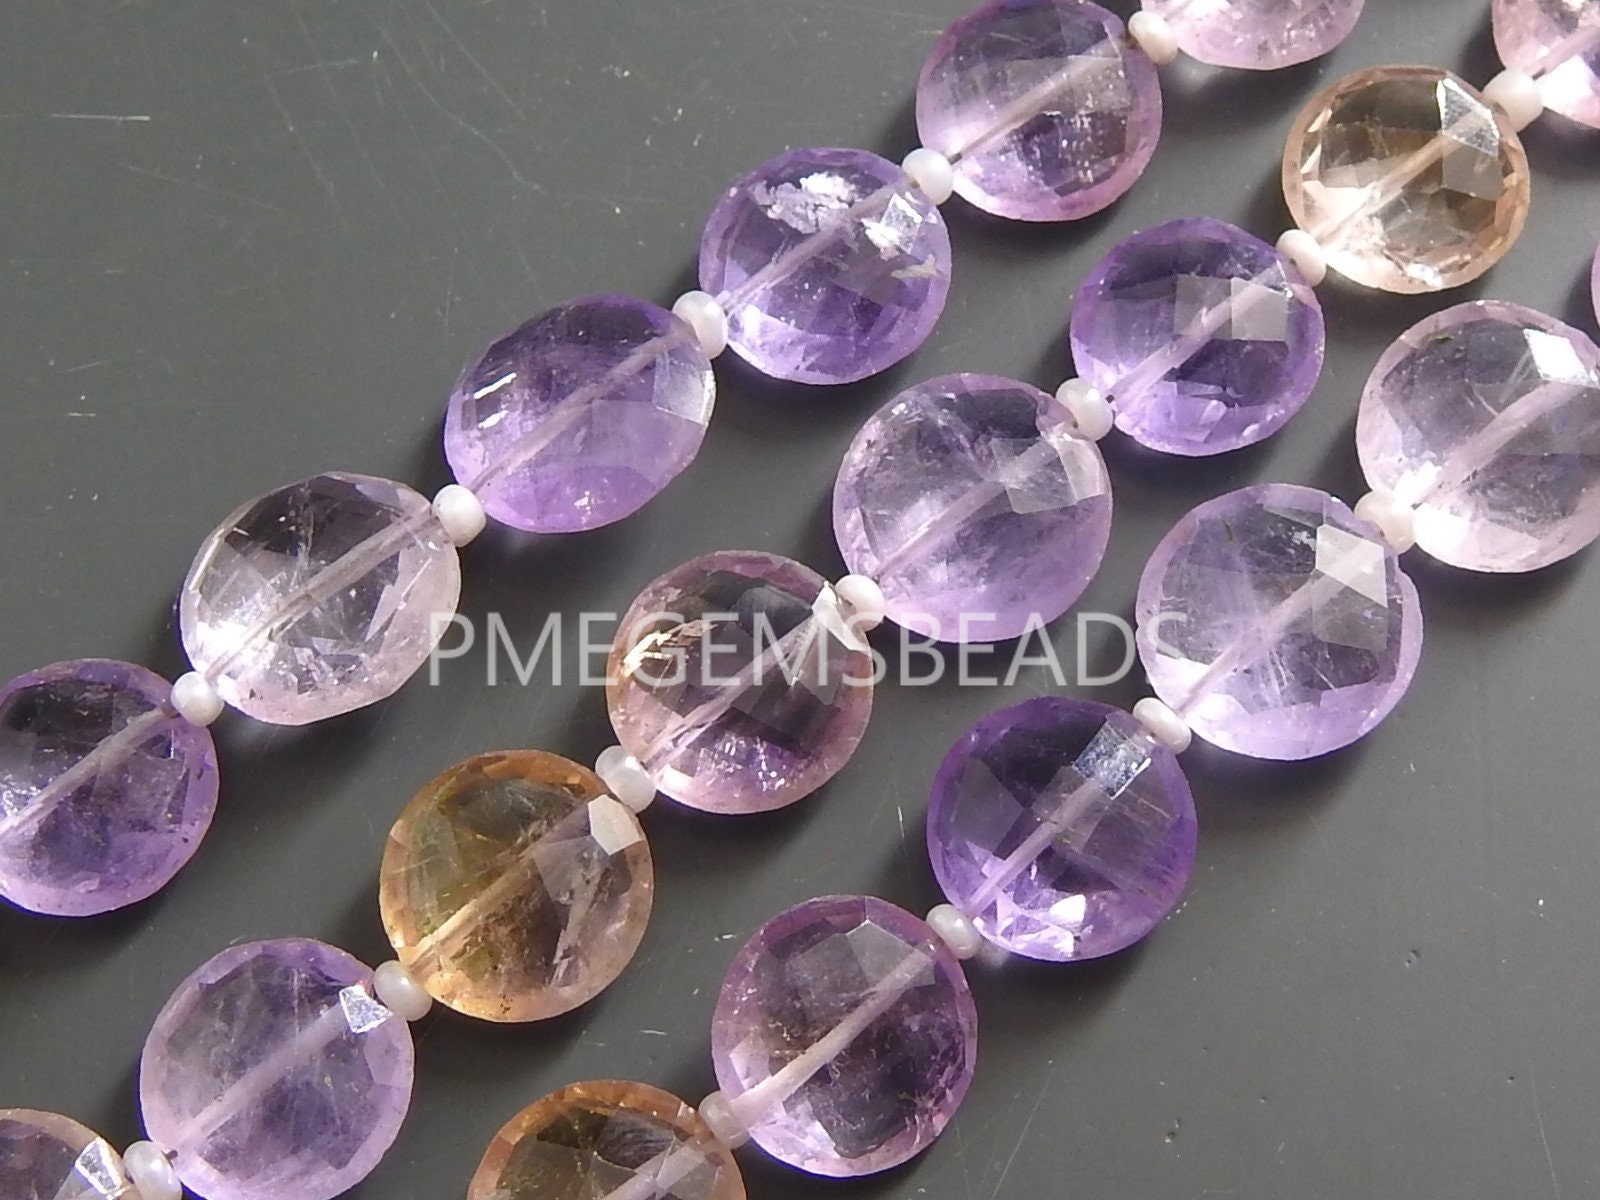 Amethyst Faceted Coins,Button,Wheel,Shaded,Gemstone,Loose Stone,Personalized Gift,For Making Jewelry 20Piece 10X11MM Approx PME(B9) | Save 33% - Rajasthan Living 14